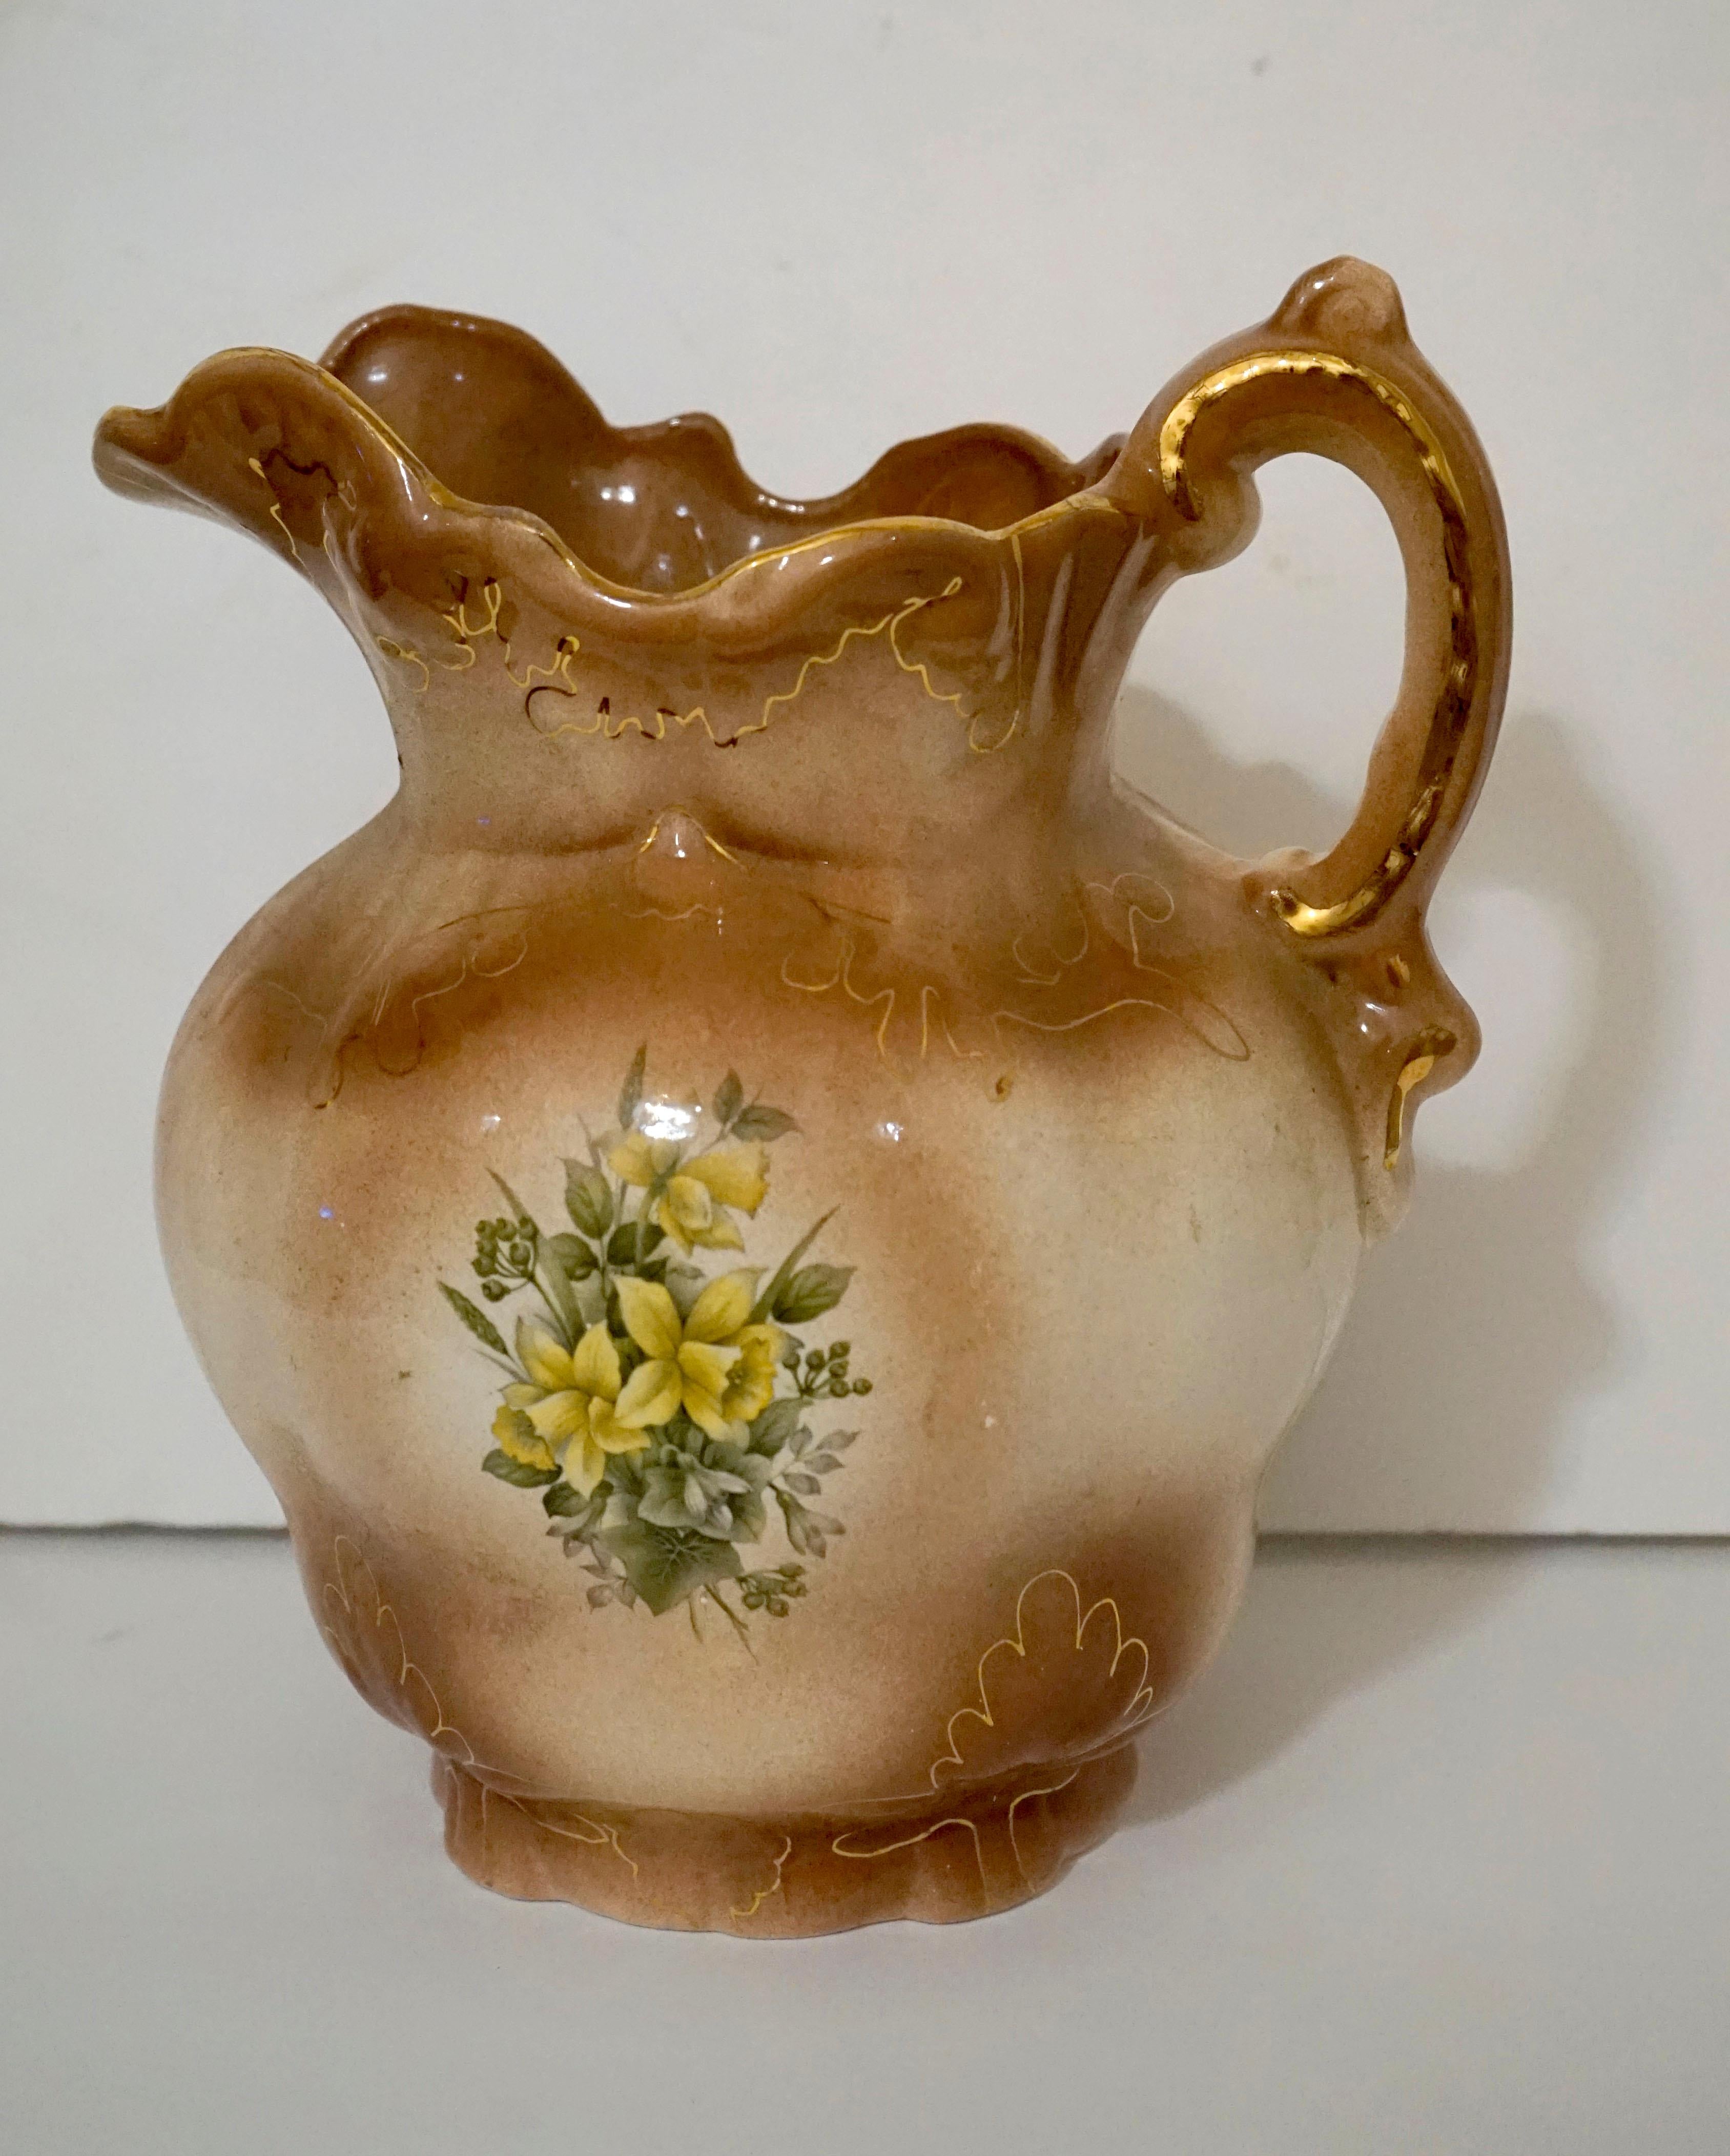 Queens Ware is the mark on this pitcher and basin set made in England in the mid to late 1800s by Wedgwood. It is also known as creamware, a technique English potters used to achieve the tan color. The set is hand painted in soft beige and accented